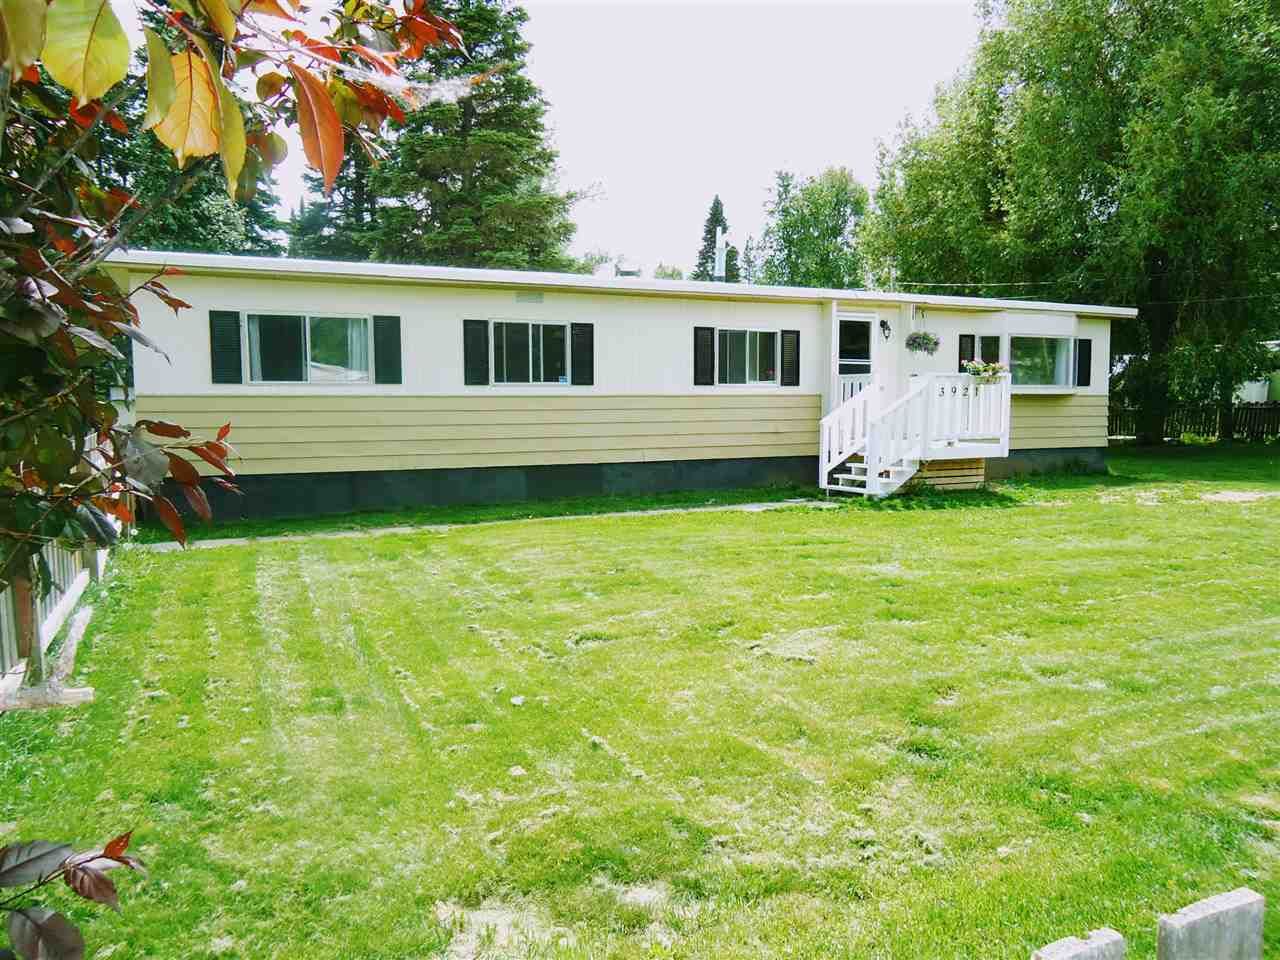 Main Photo: 3921 KNIGHT Crescent in Prince George: Emerald Manufactured Home for sale (PG City North (Zone 73))  : MLS®# R2379264